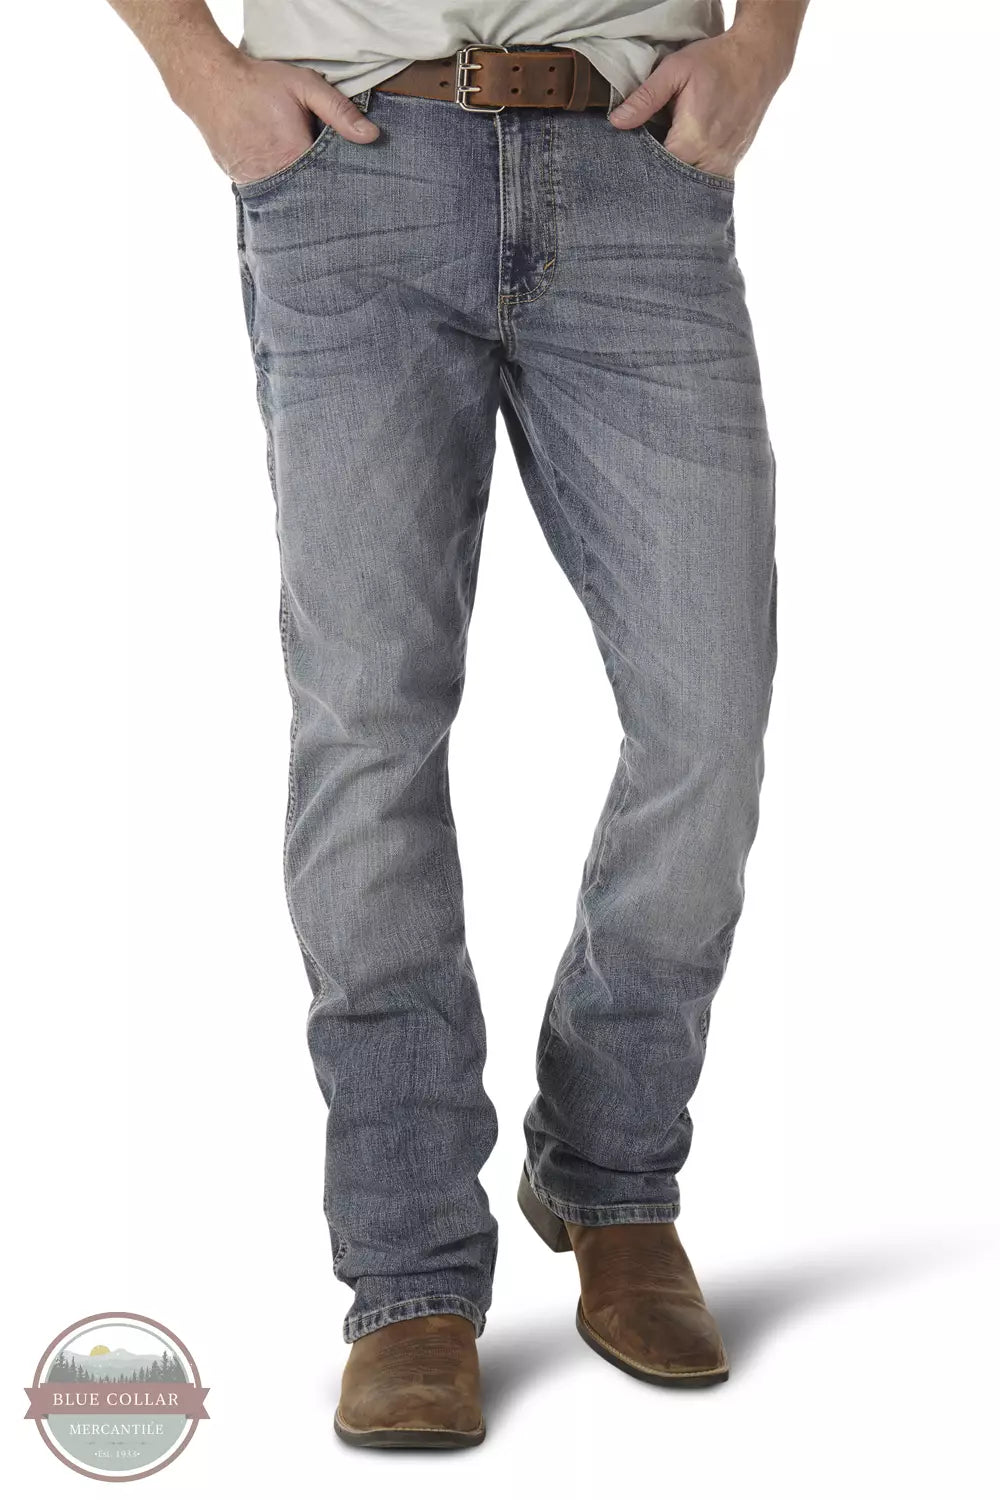 Wrangler 77MWZGL Retro Slim Fit Bootcut Jeans in Greeley Front View